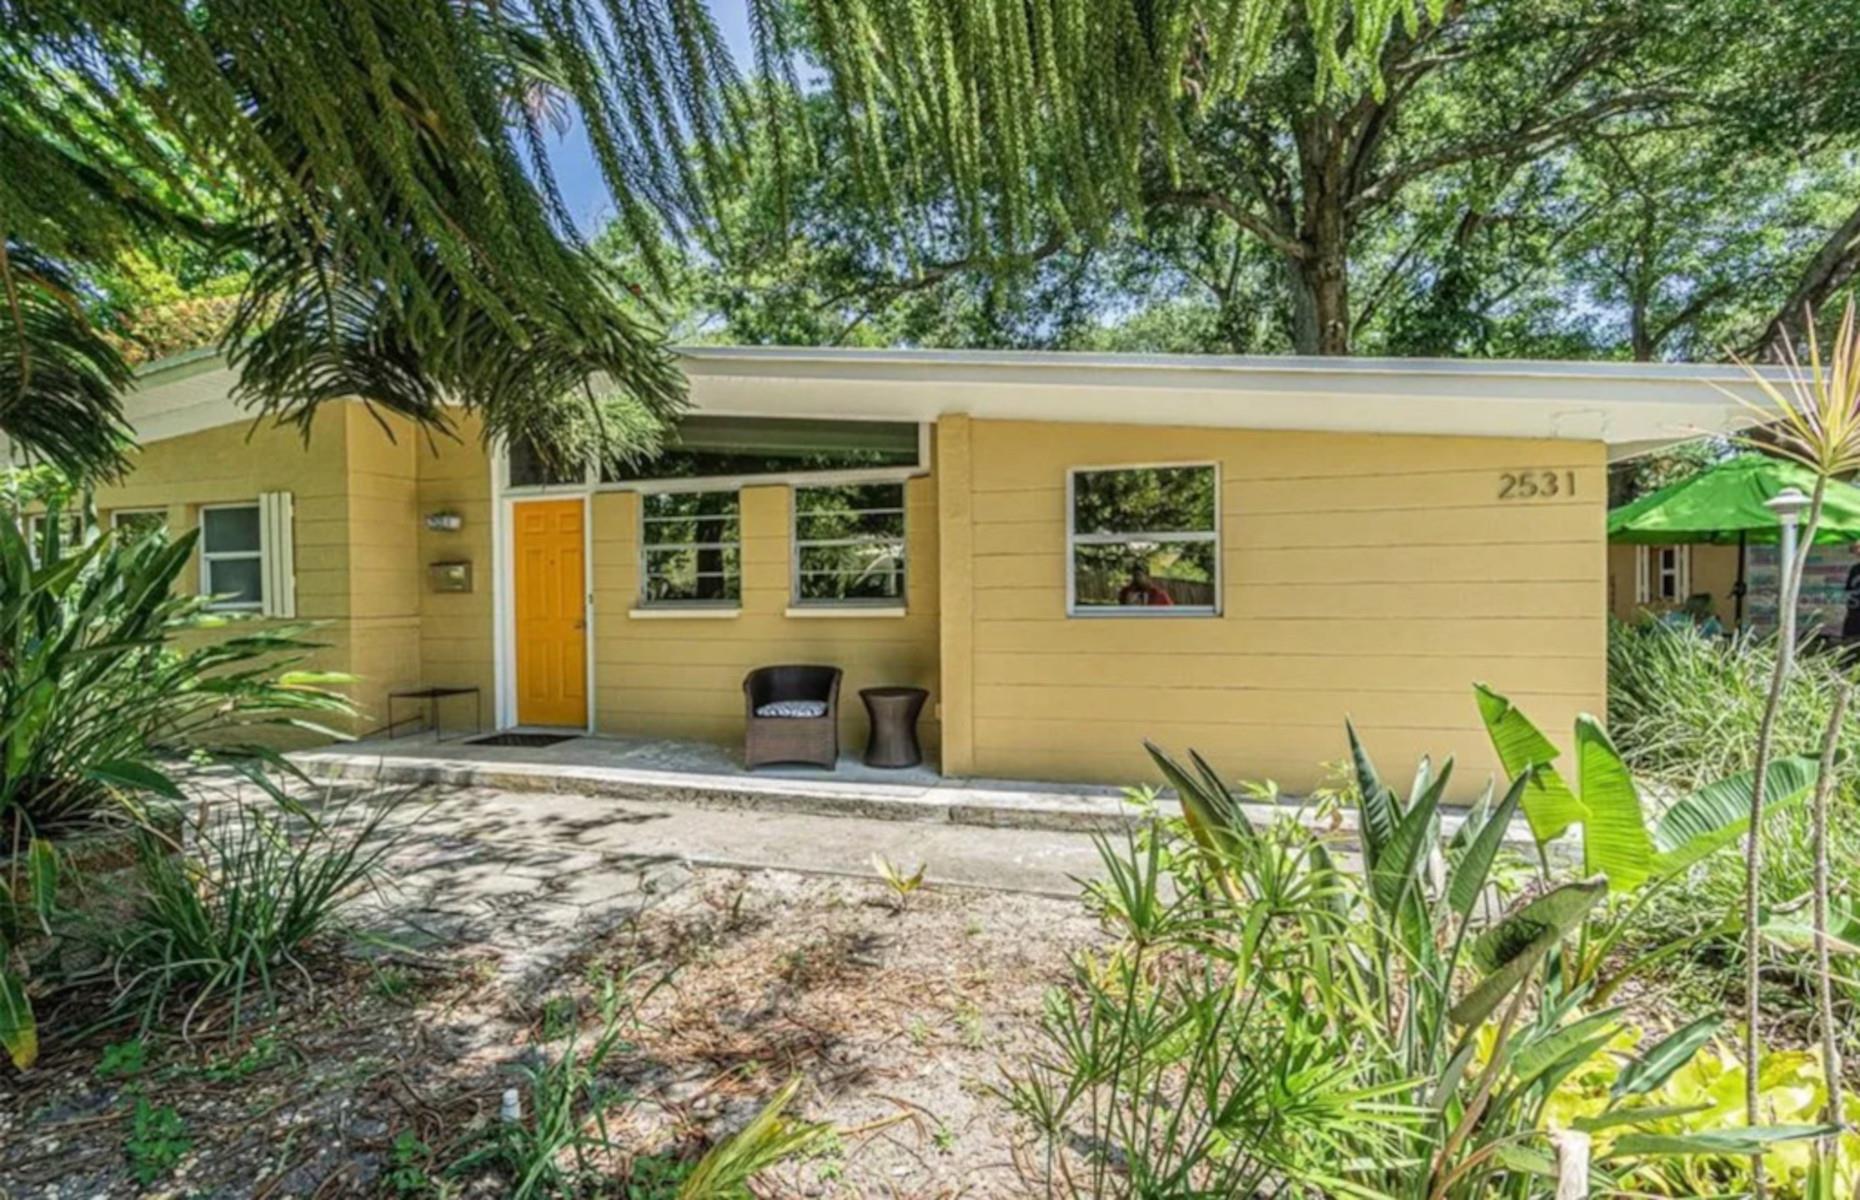 11 Modernist Homes for Sale in the U.S.